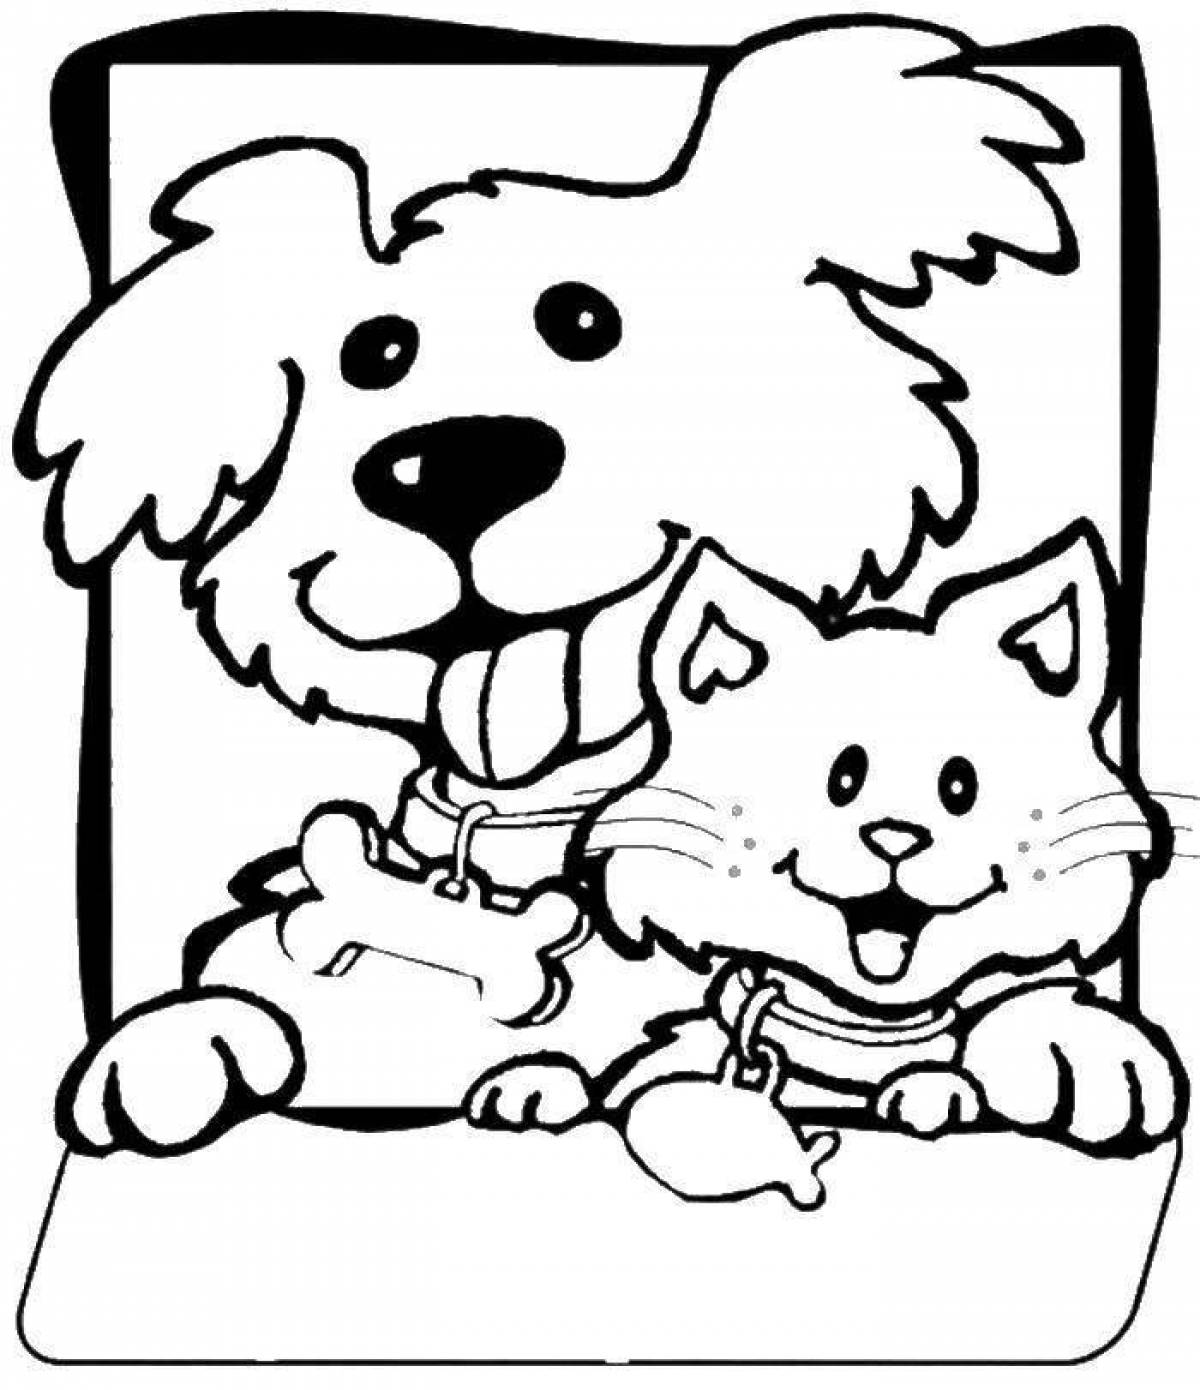 Naughty cat and dog coloring page